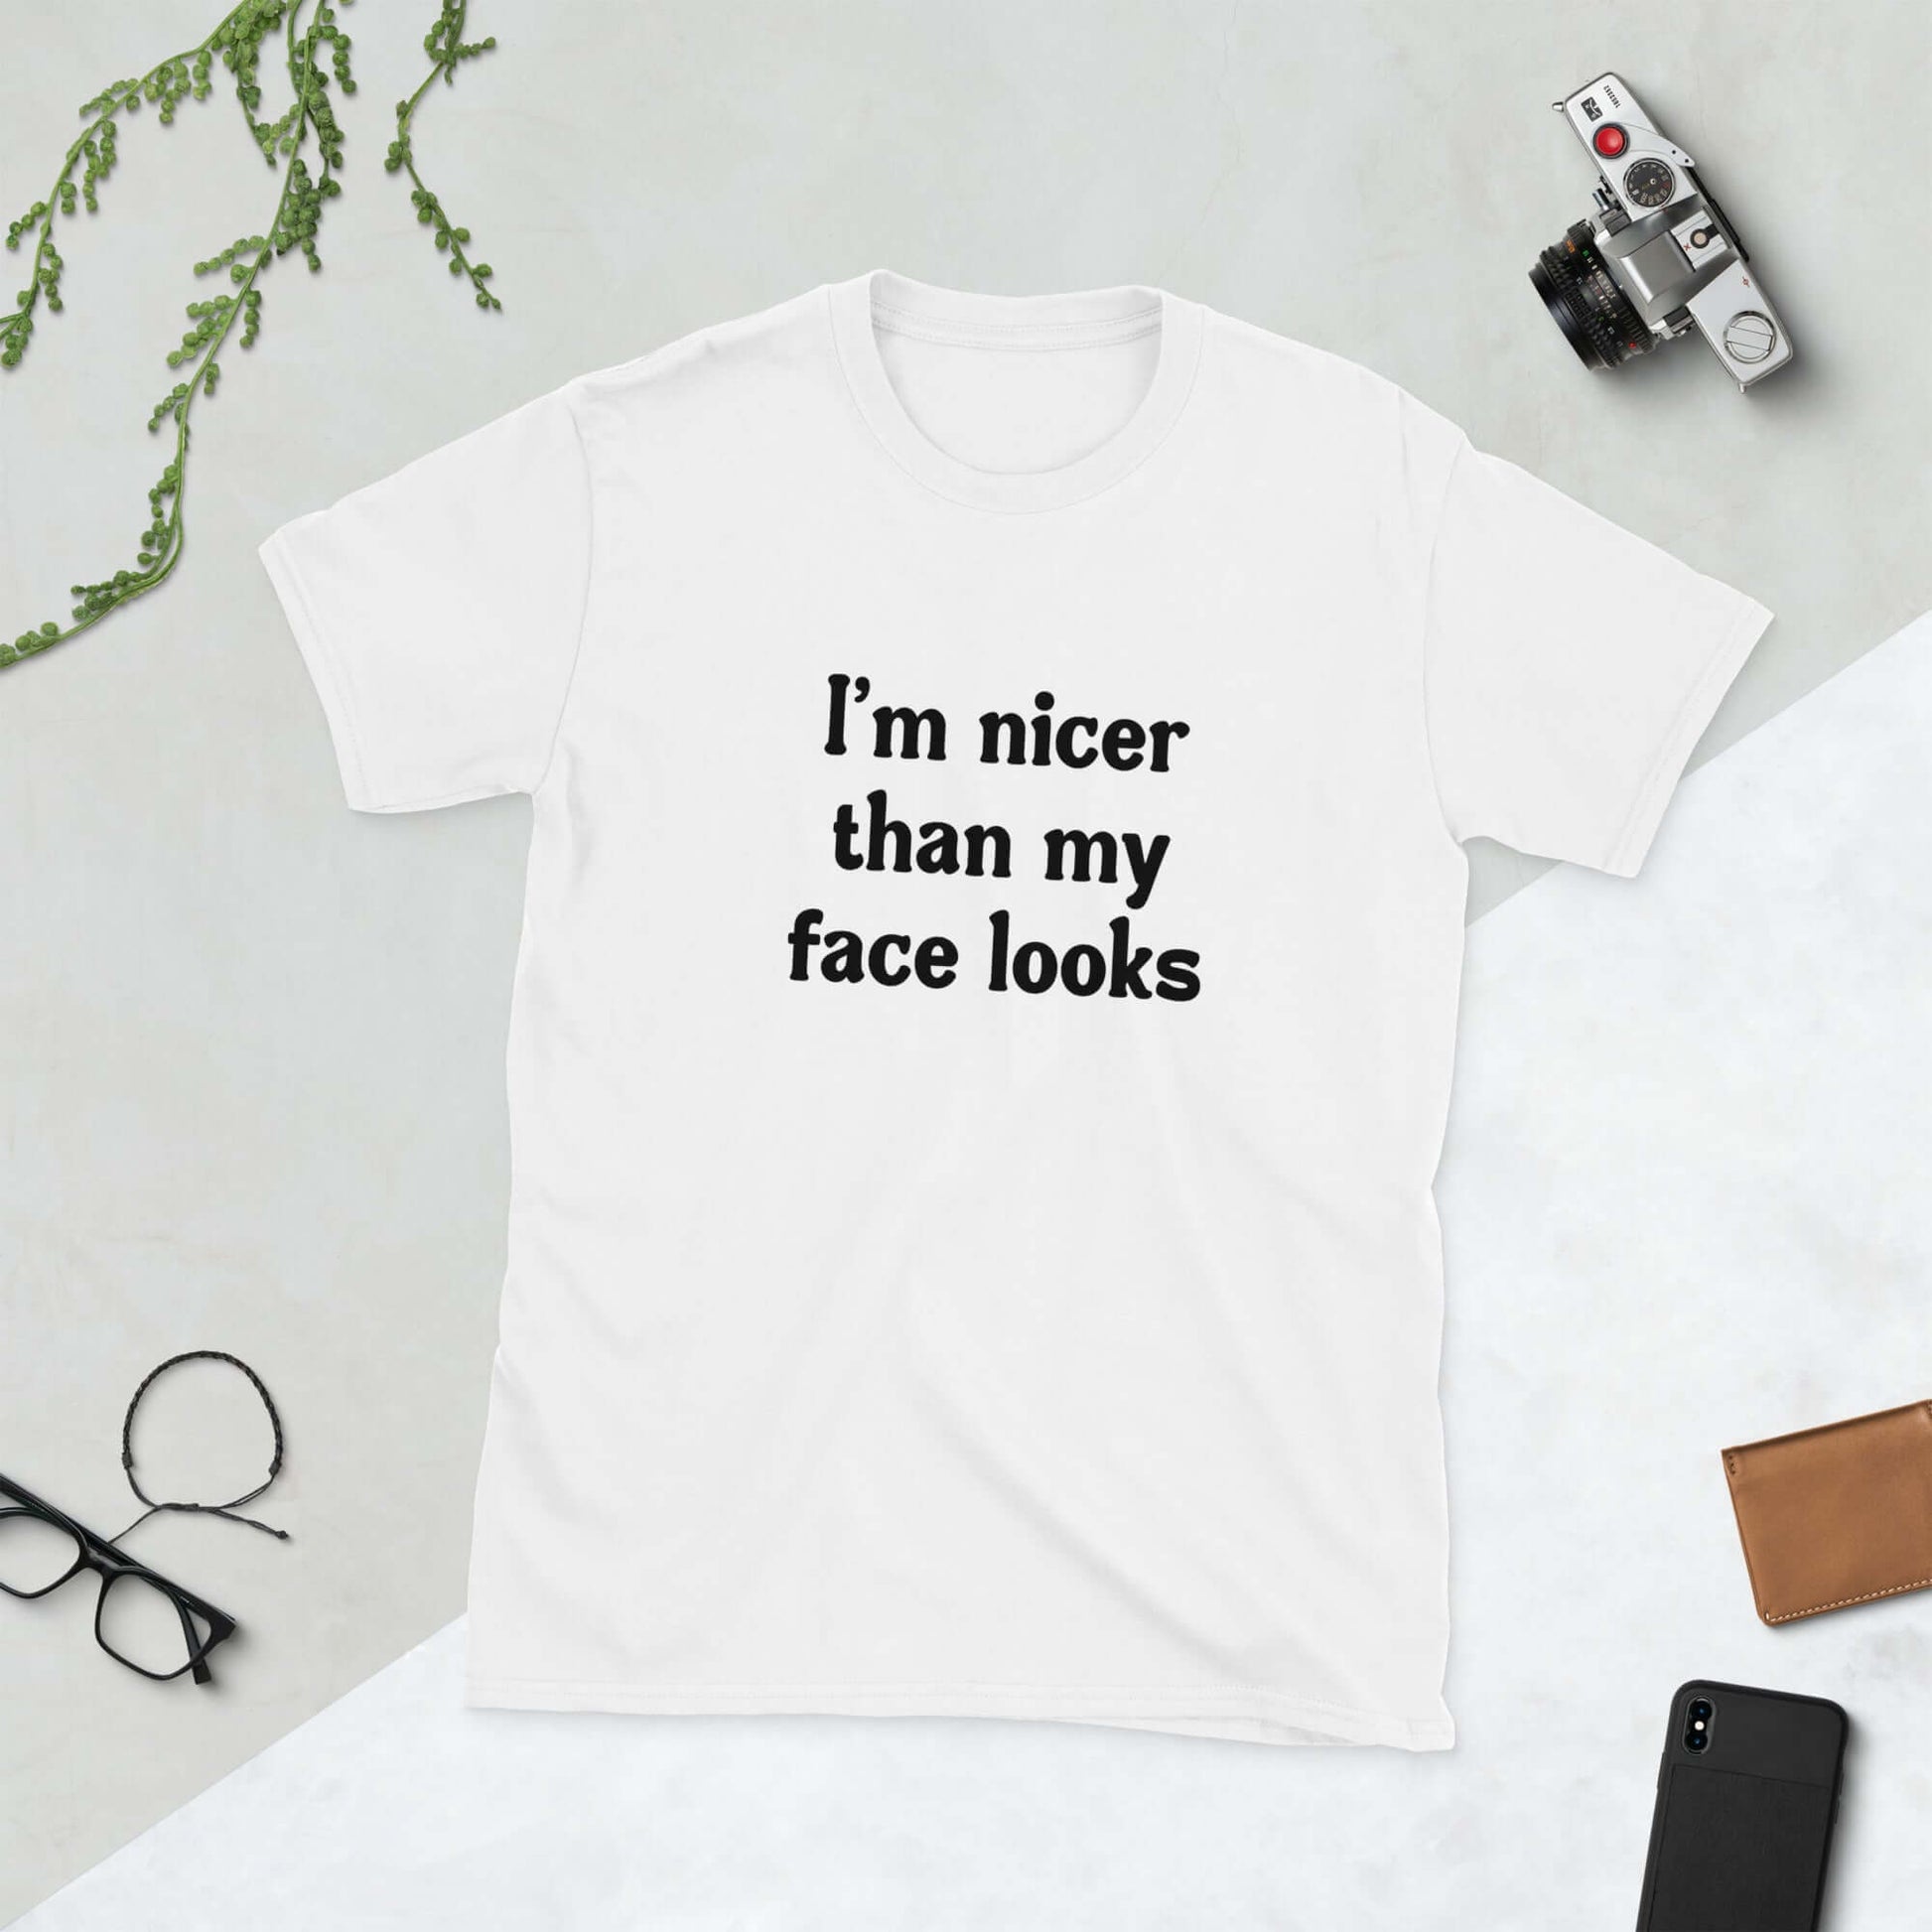 White t-shirt that says I'm nicer than my face looks printed on the front.